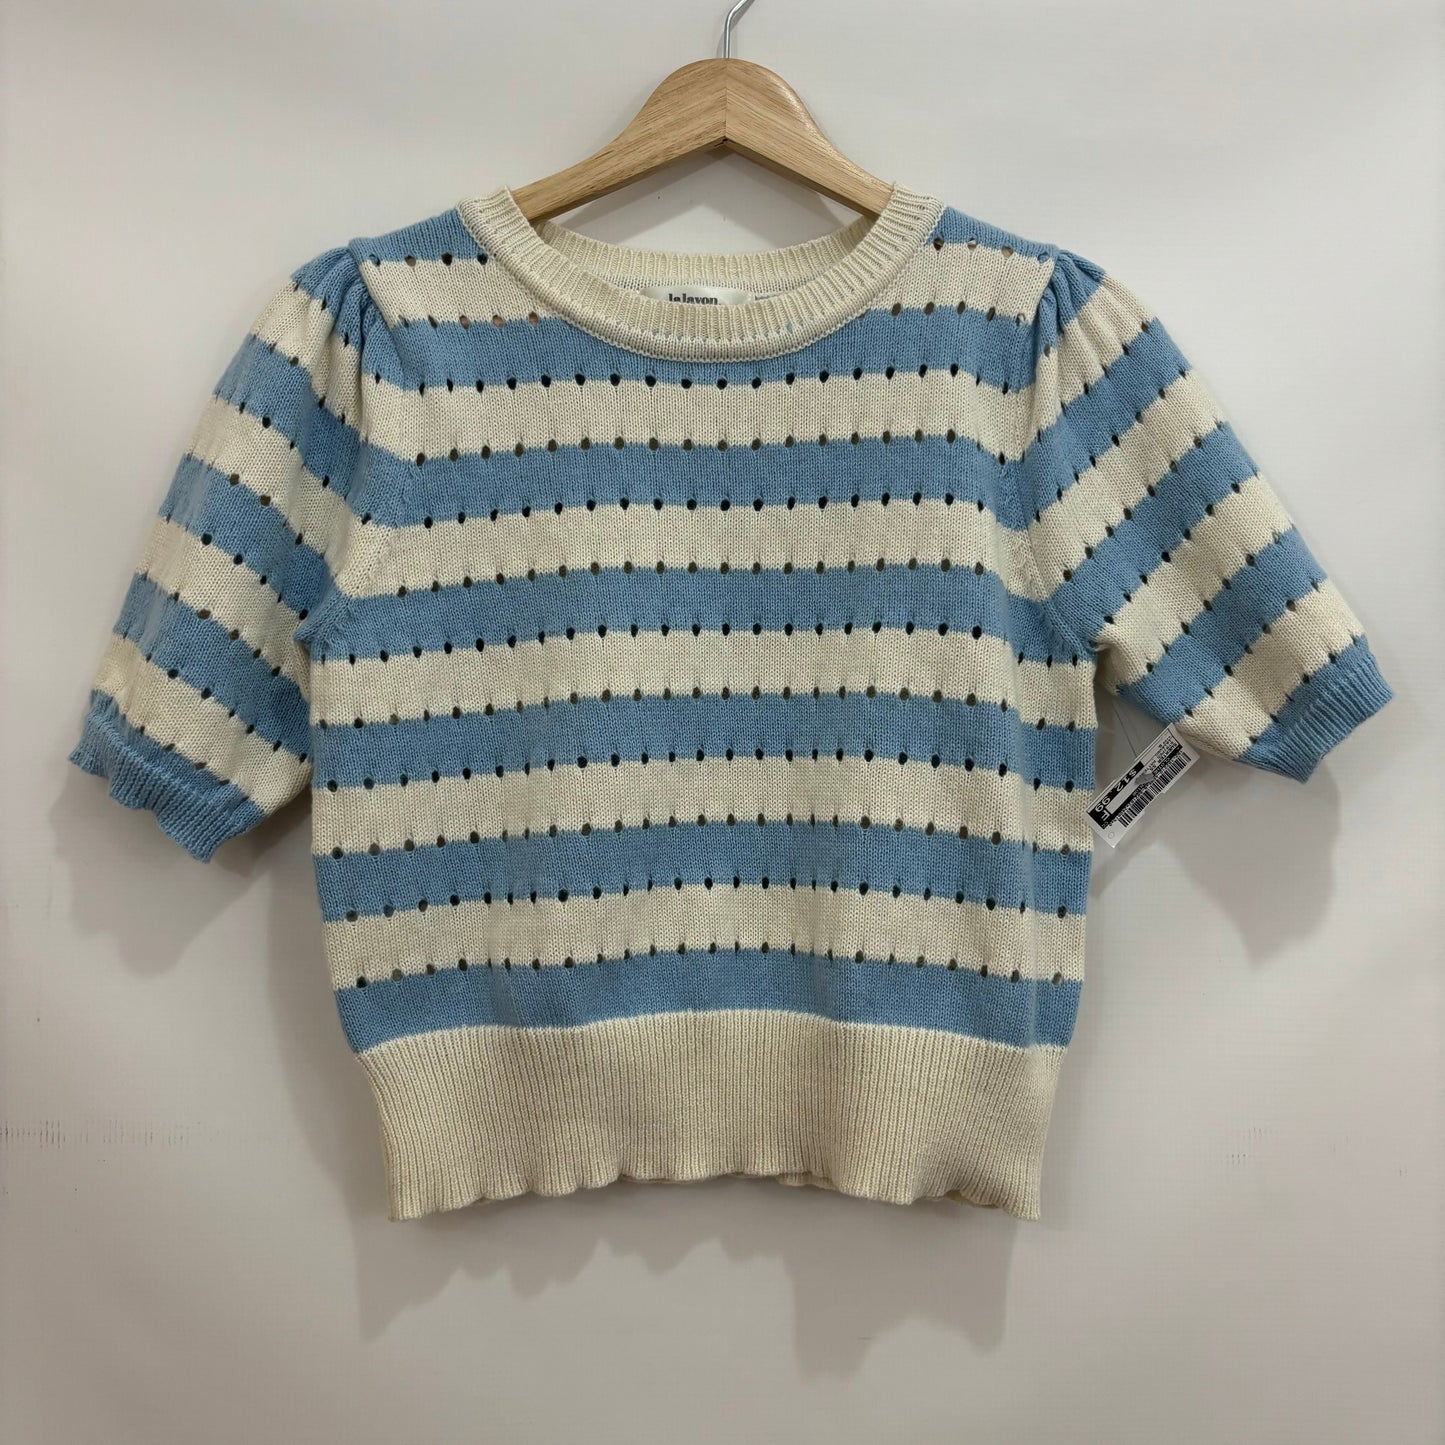 Striped Pattern Sweater Short Sleeve Clothes Mentor, Size S